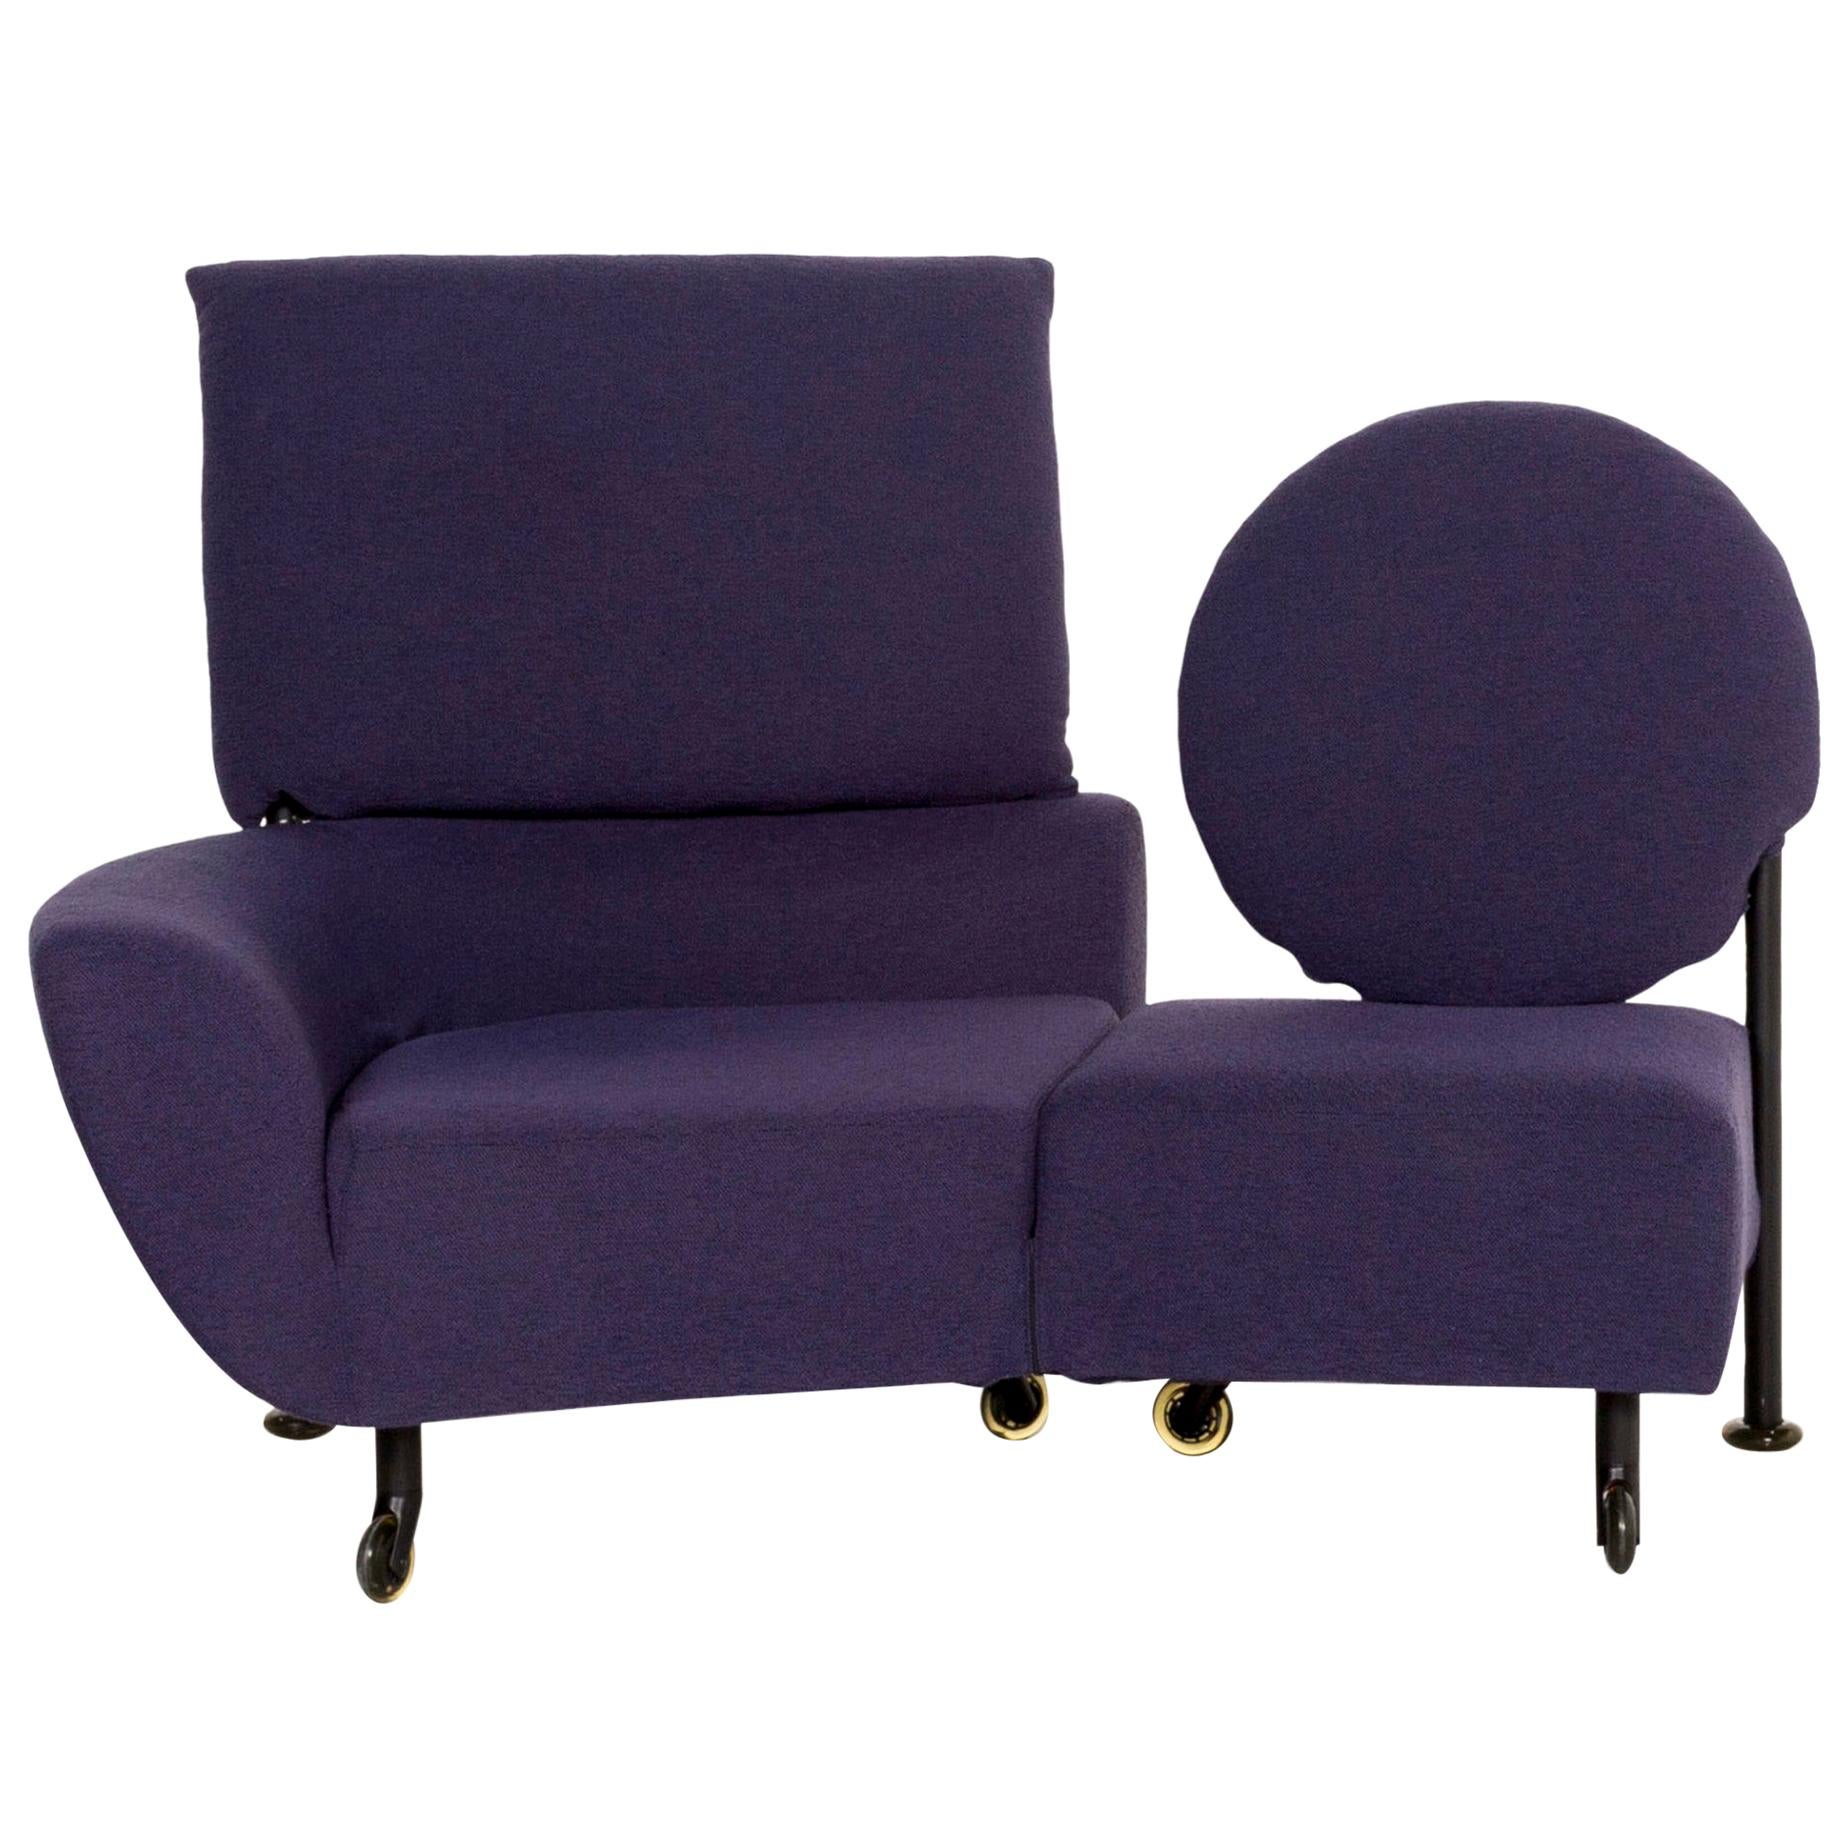 Cassina 290 TopKapi Fabric Sofa Violet Two-Seat Function Relax Function Couch